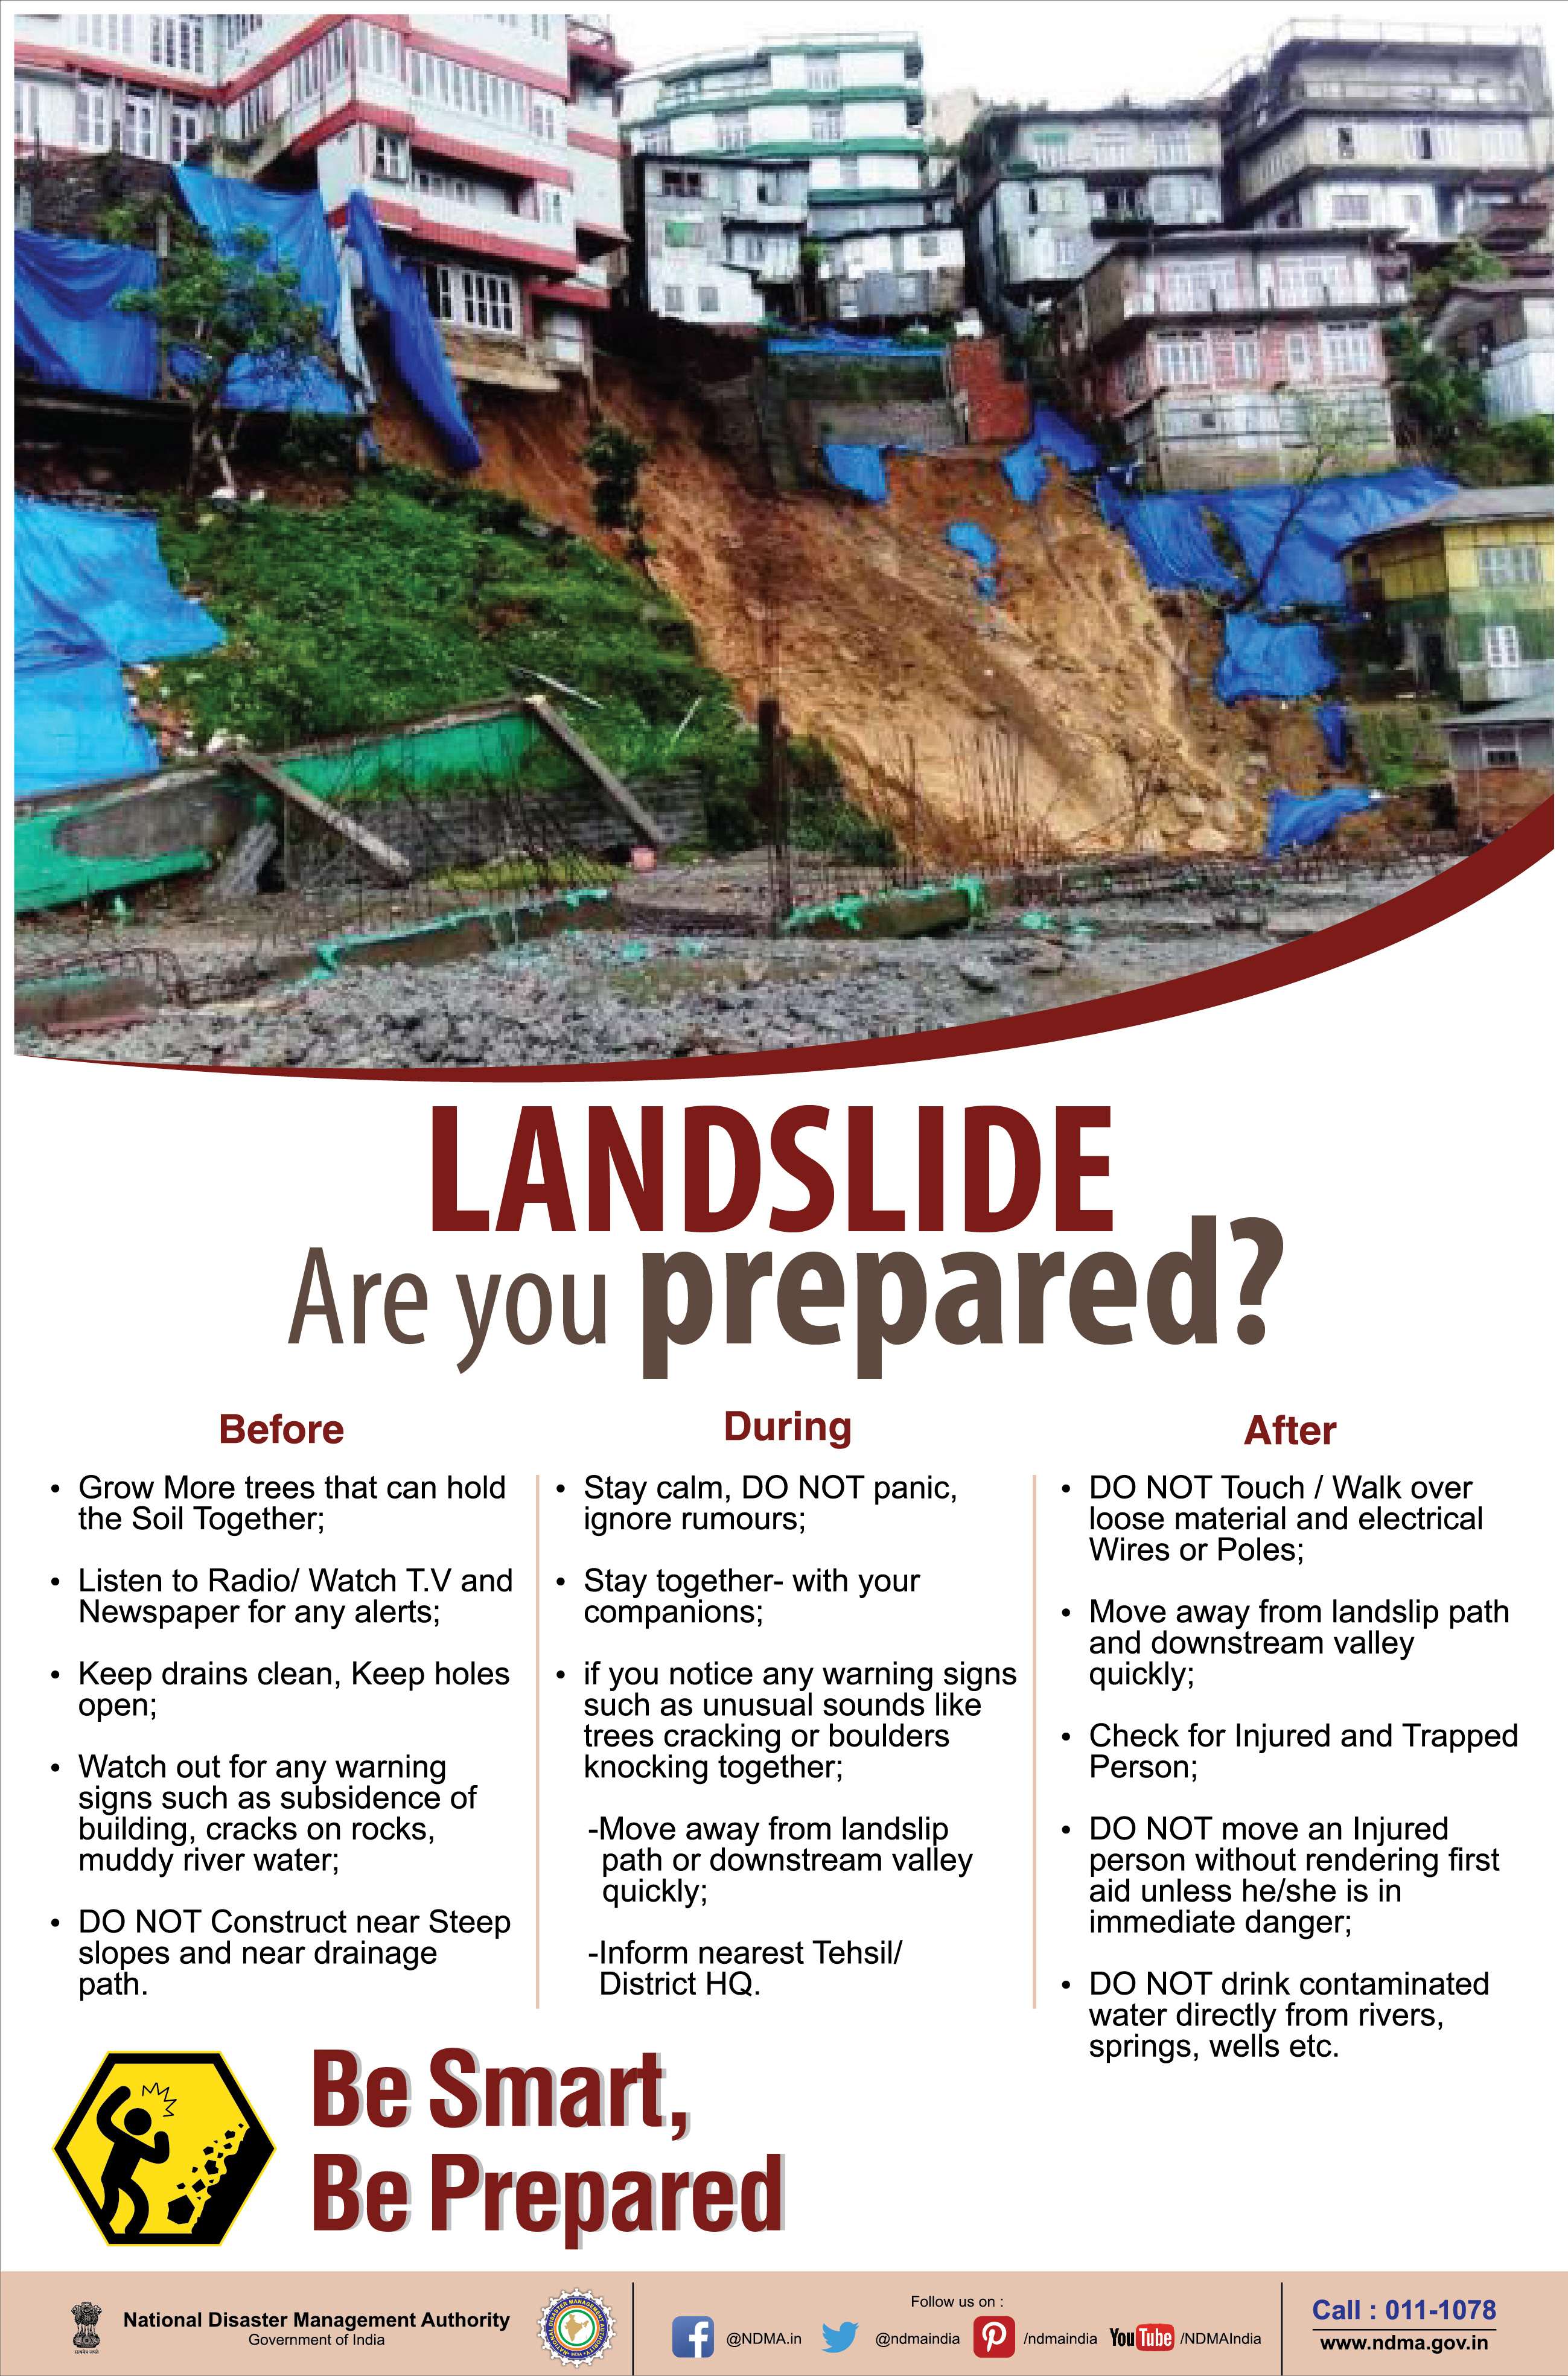 Are you prepared for a landslide? 